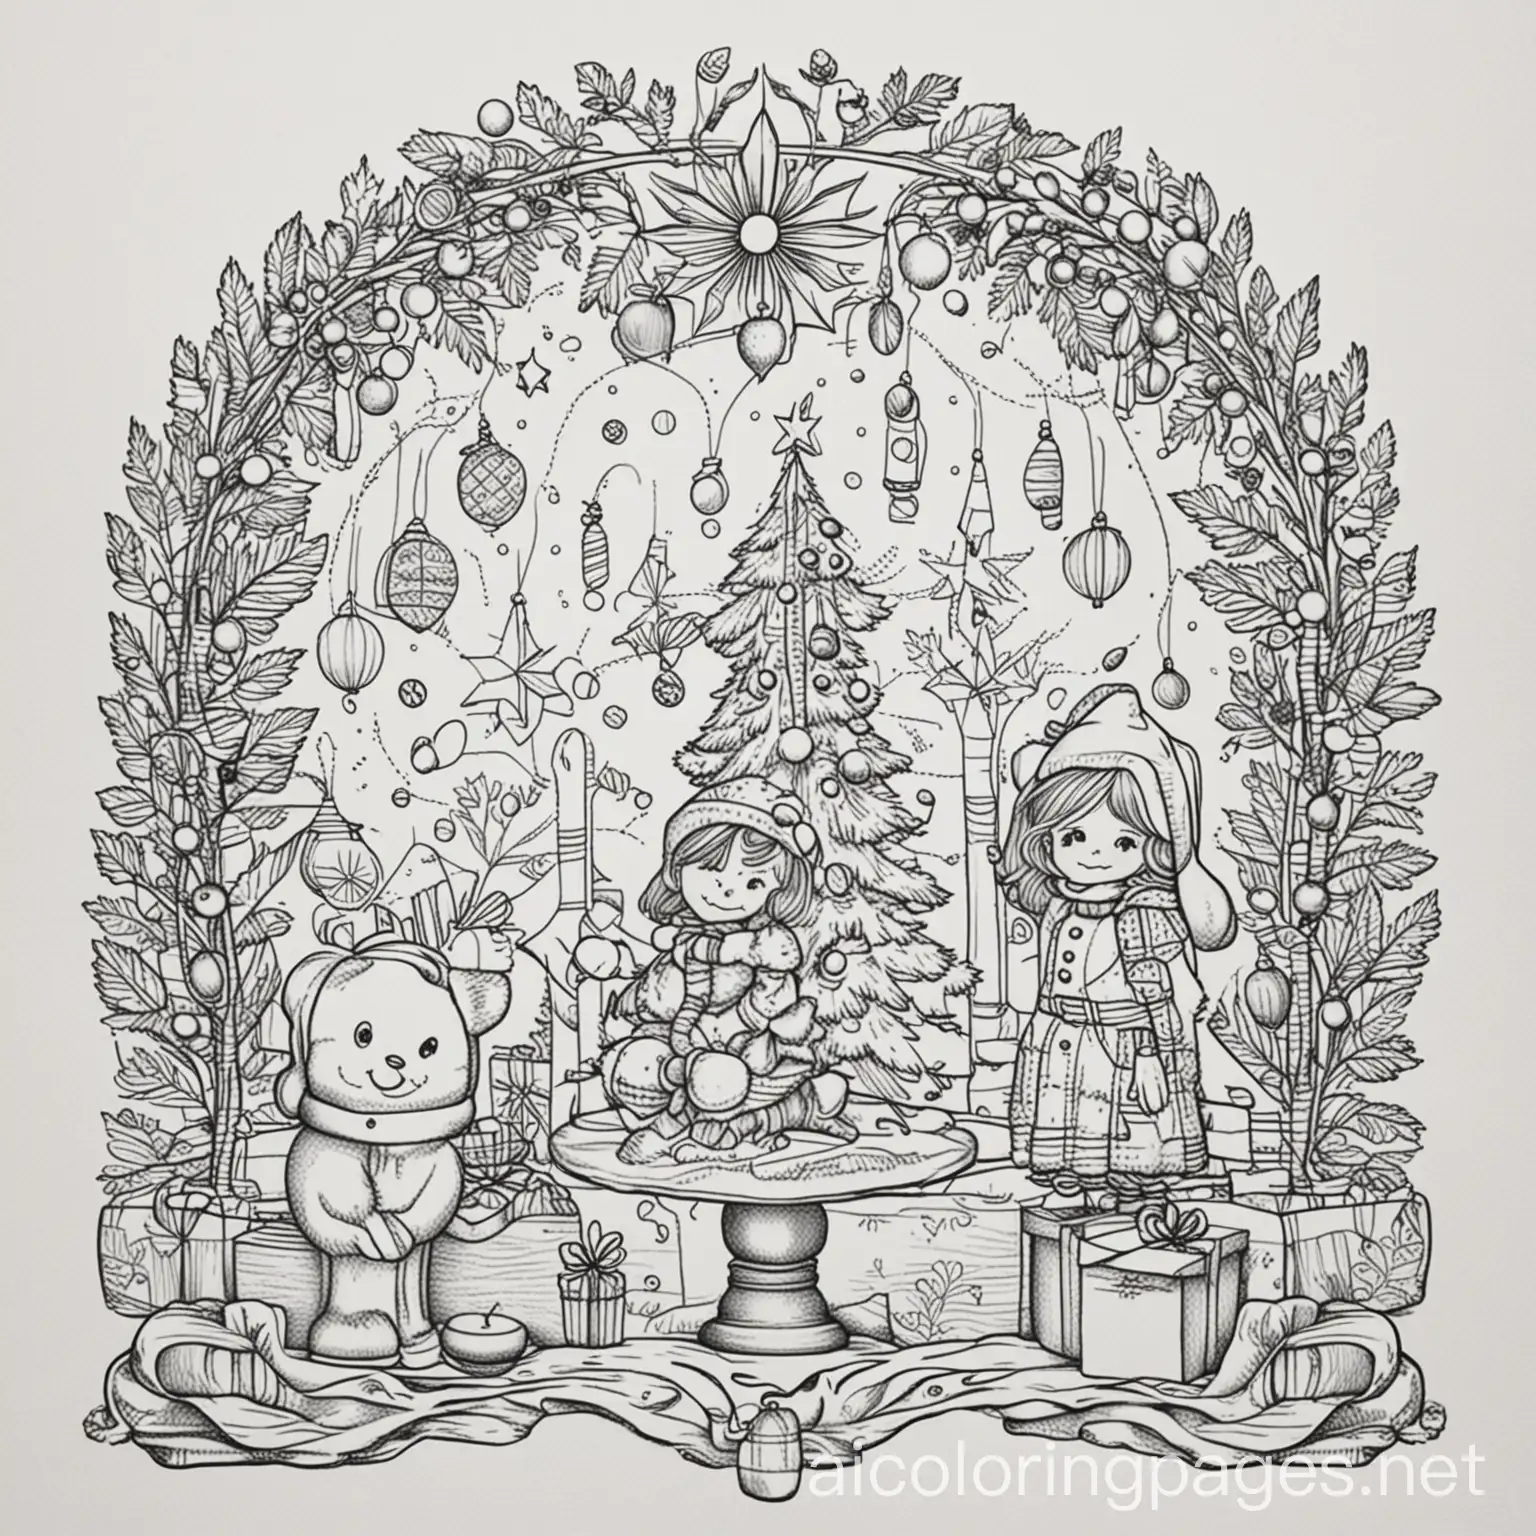 Vintage christmas decor, Coloring Page, black and white, line art, white background, Simplicity, Ample White Space. The background of the coloring page is plain white to make it easy for young children to color within the lines. The outlines of all the subjects are easy to distinguish, making it simple for kids to color without too much difficulty